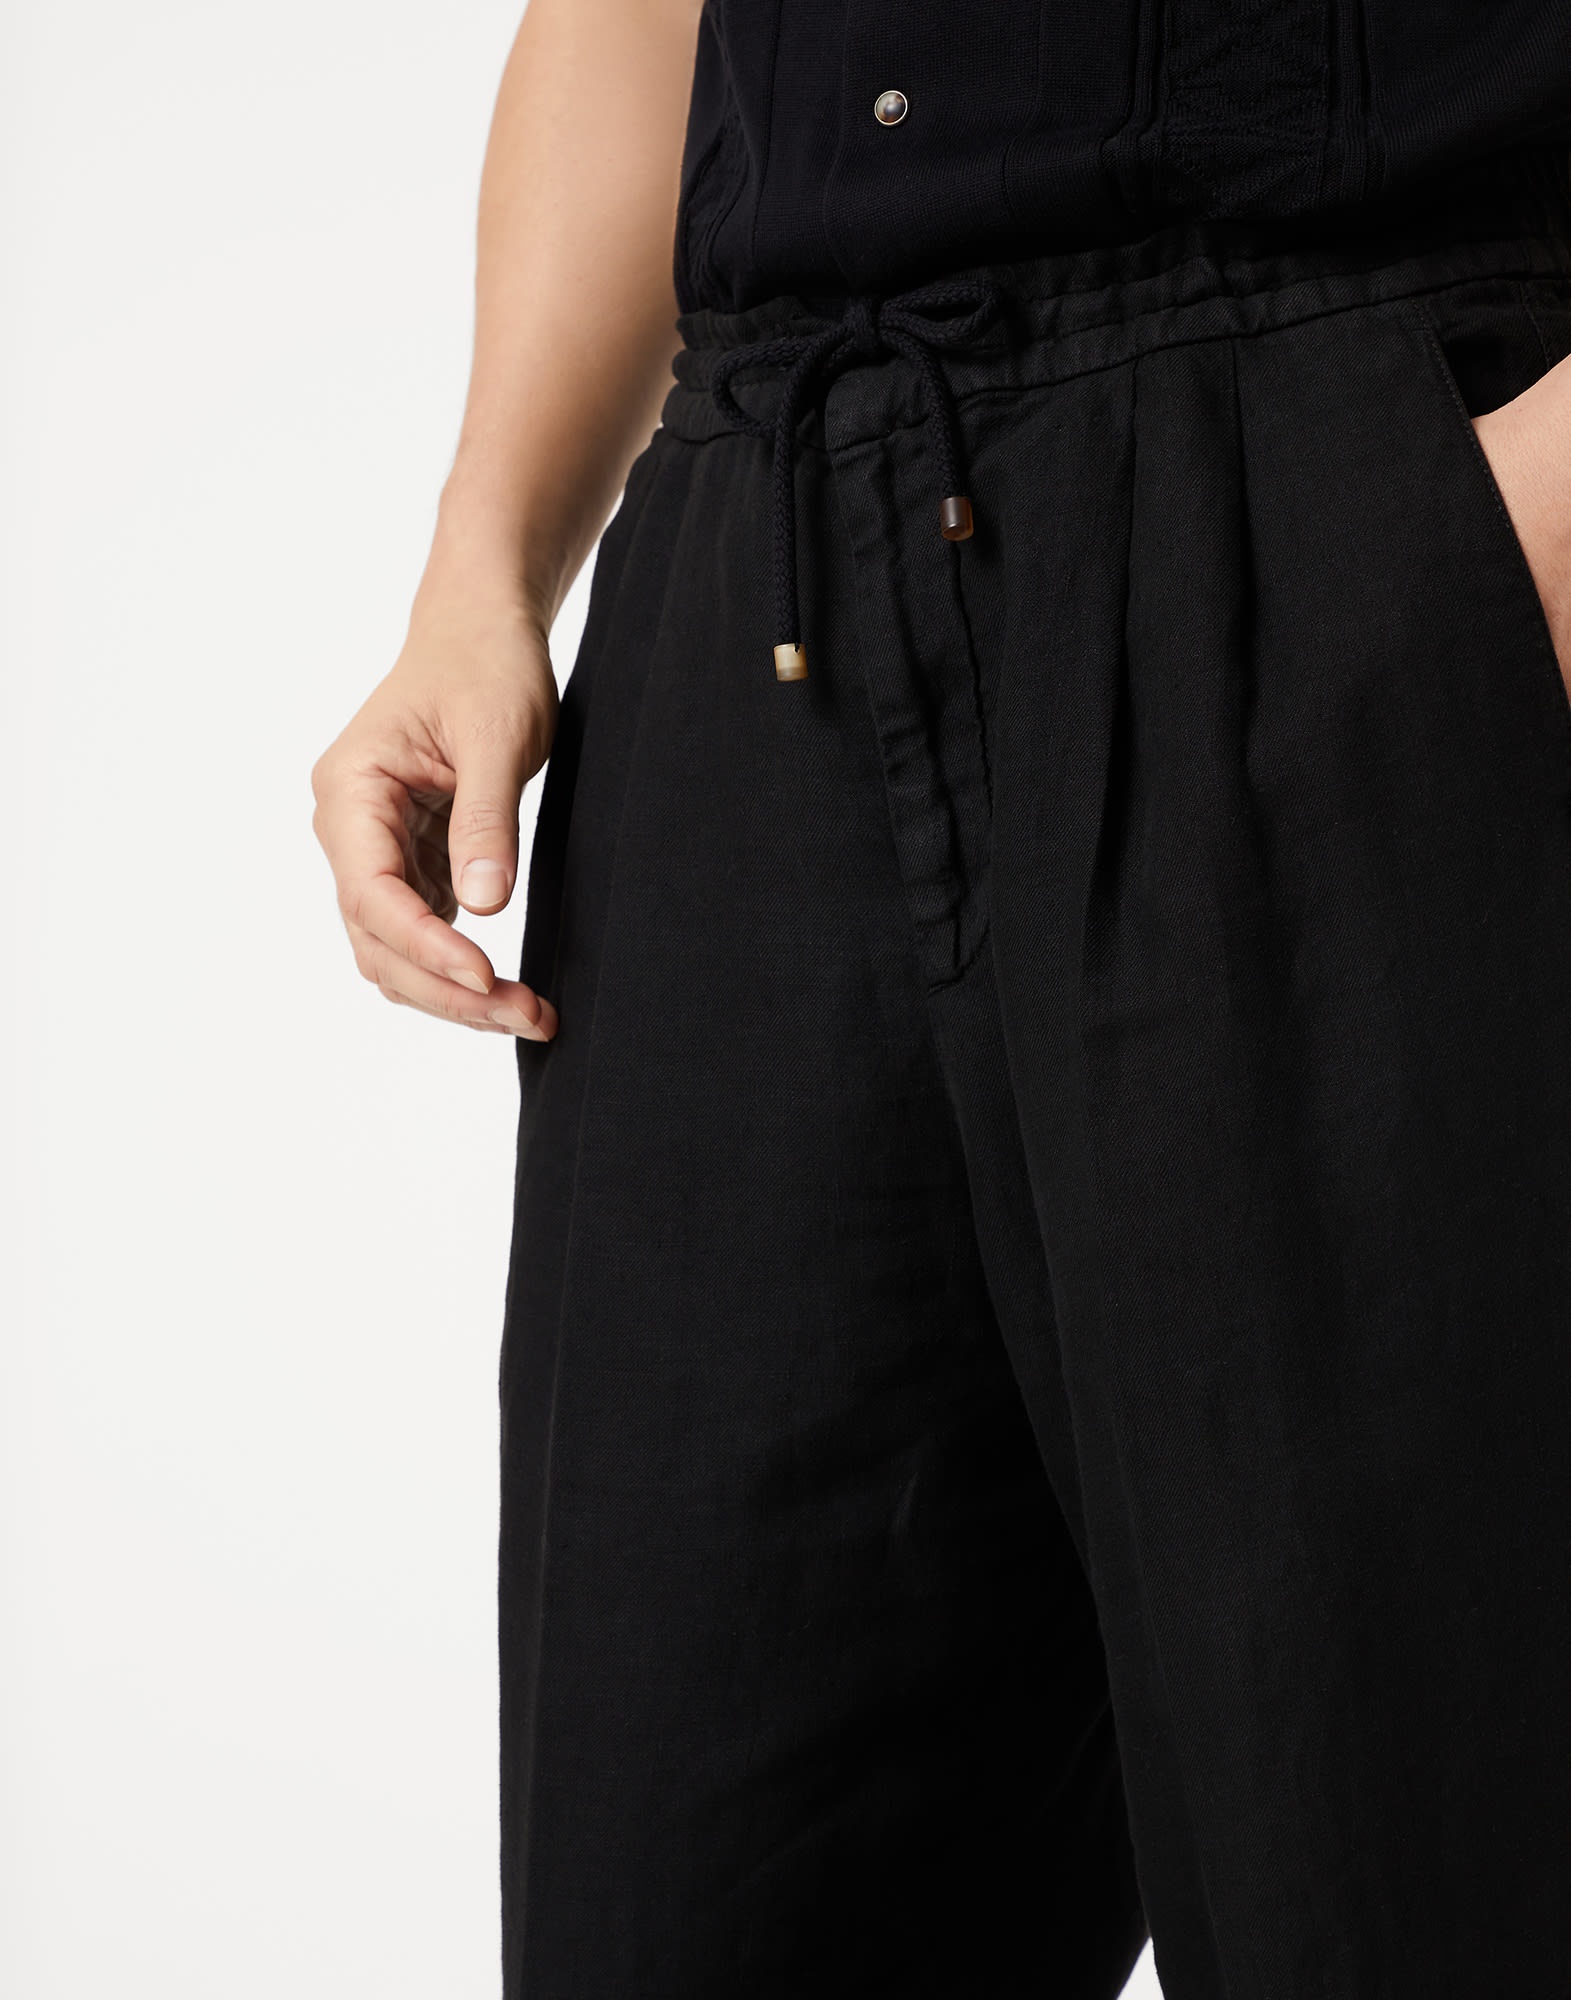 Garment-dyed leisure fit trousers in linen gabardine with drawstring and double pleats - 3